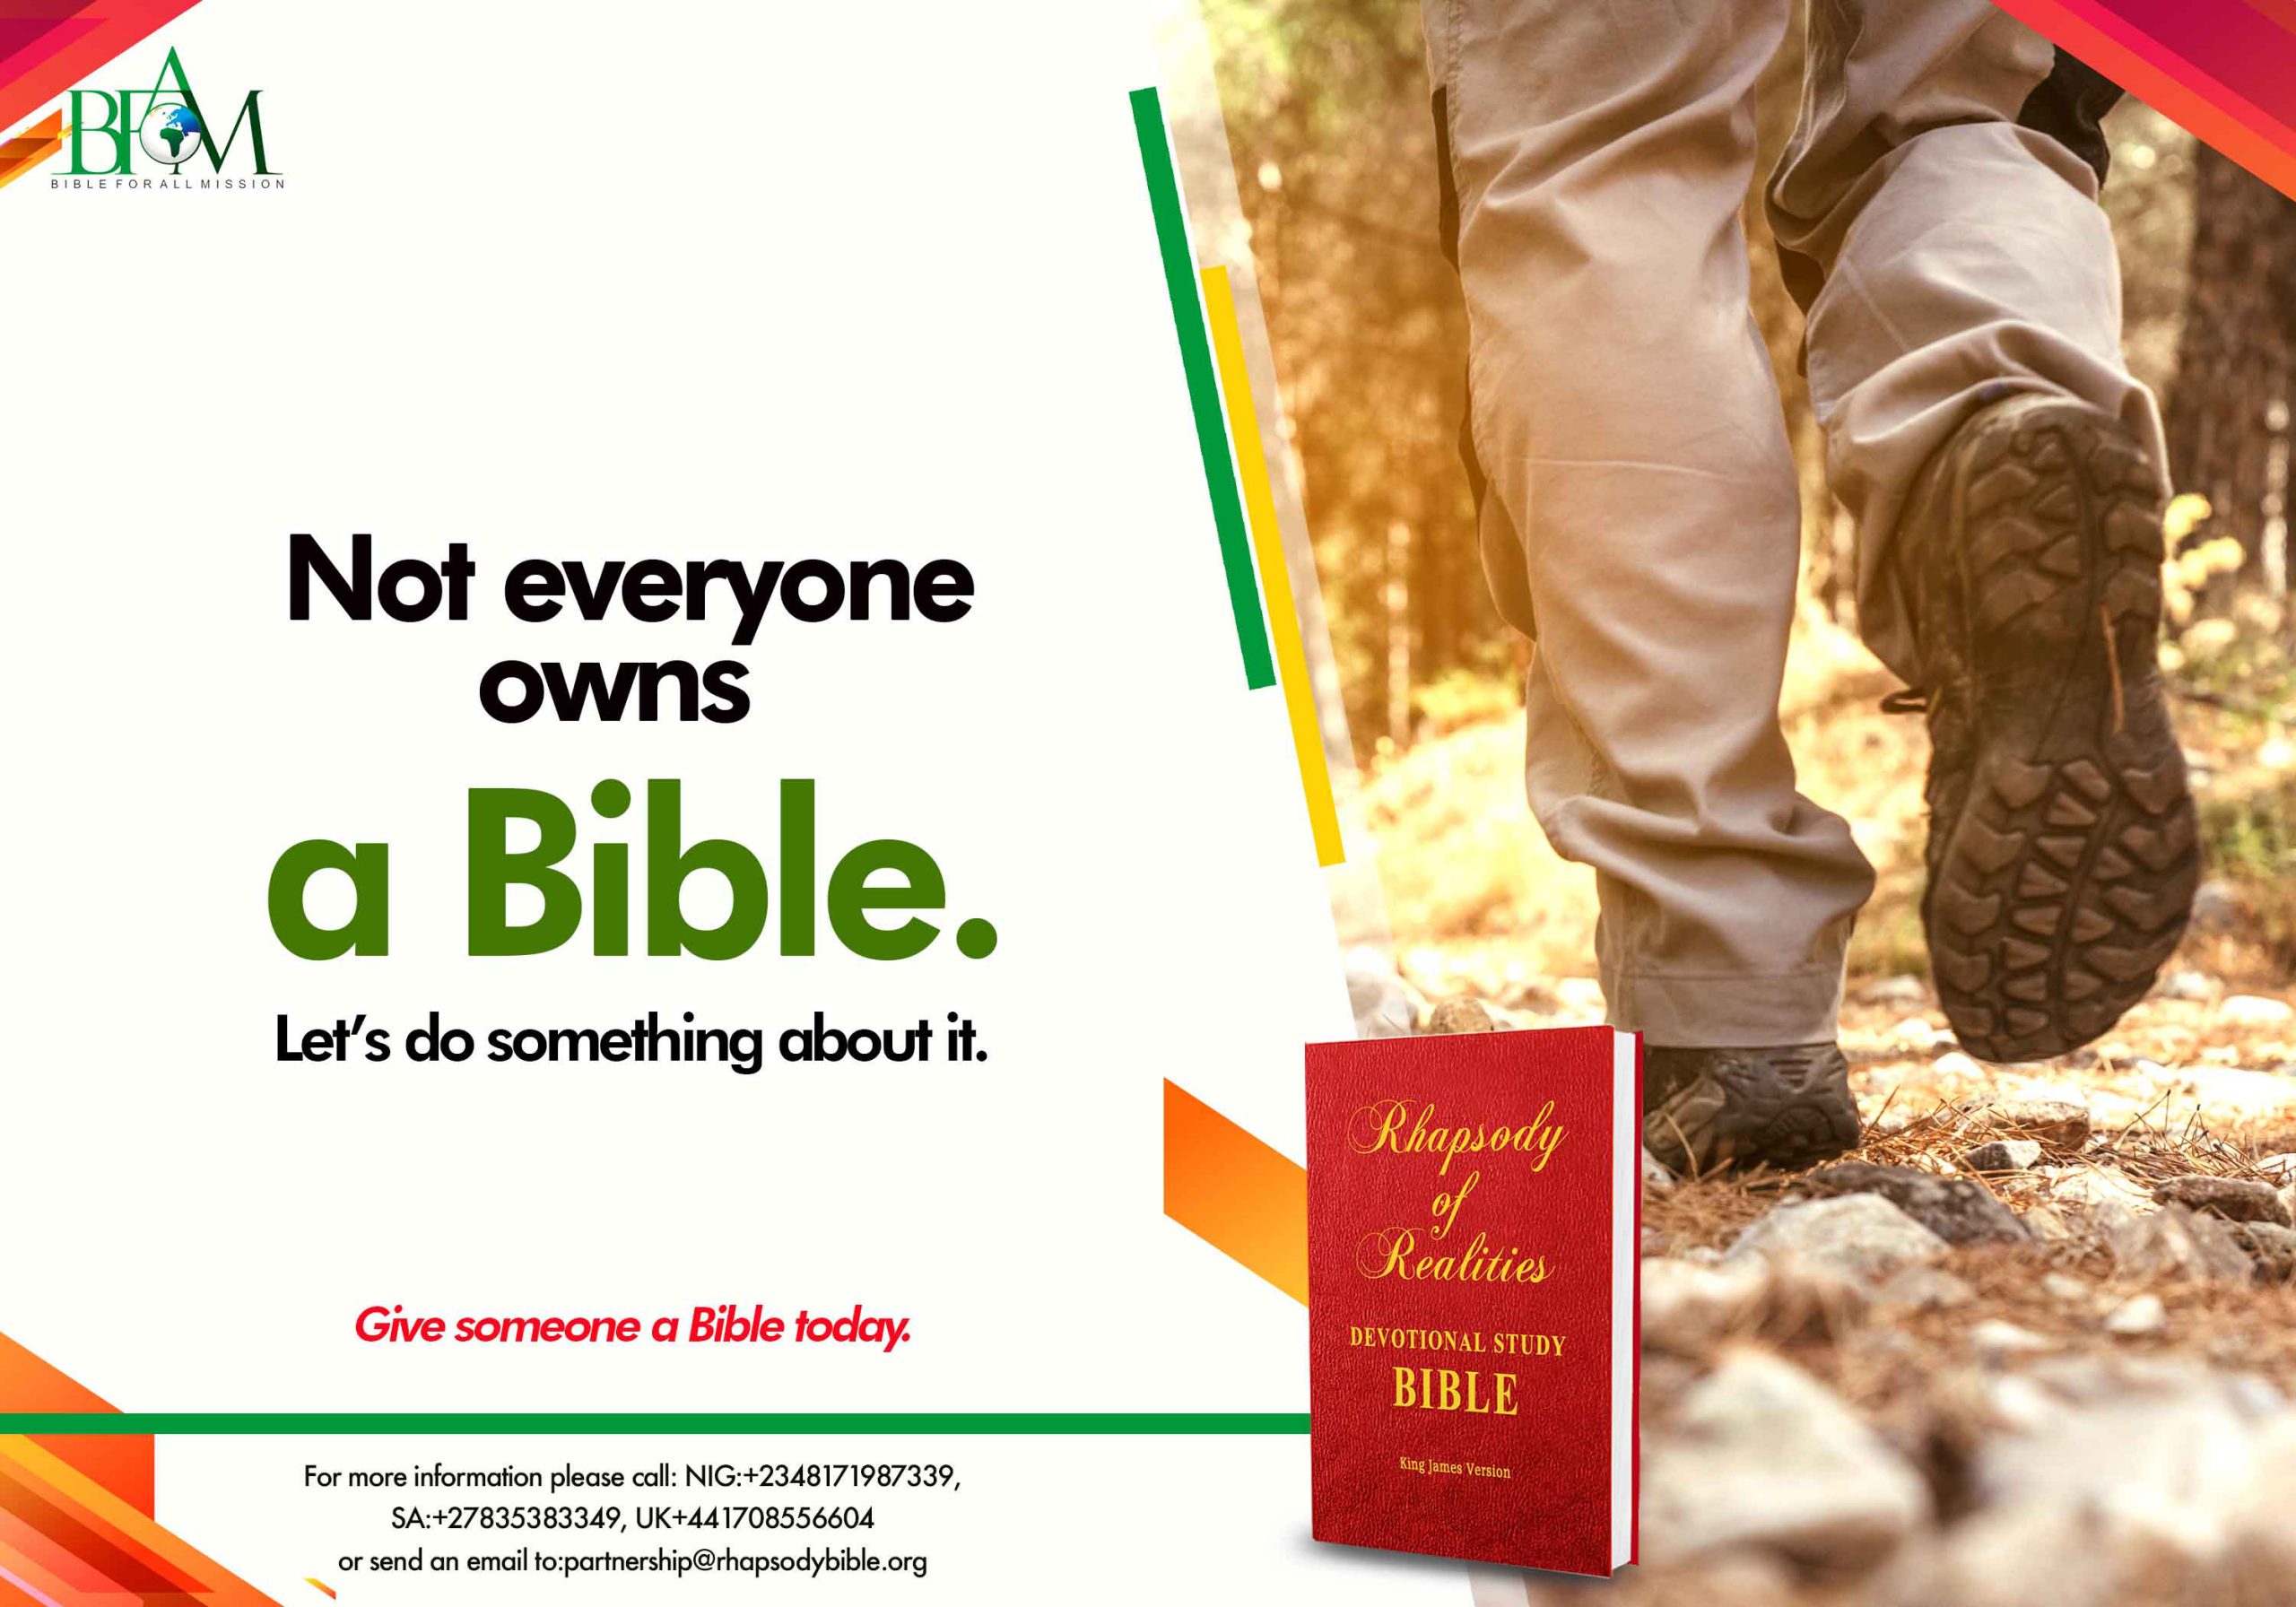 Bible For All Is The Ultimate Mission